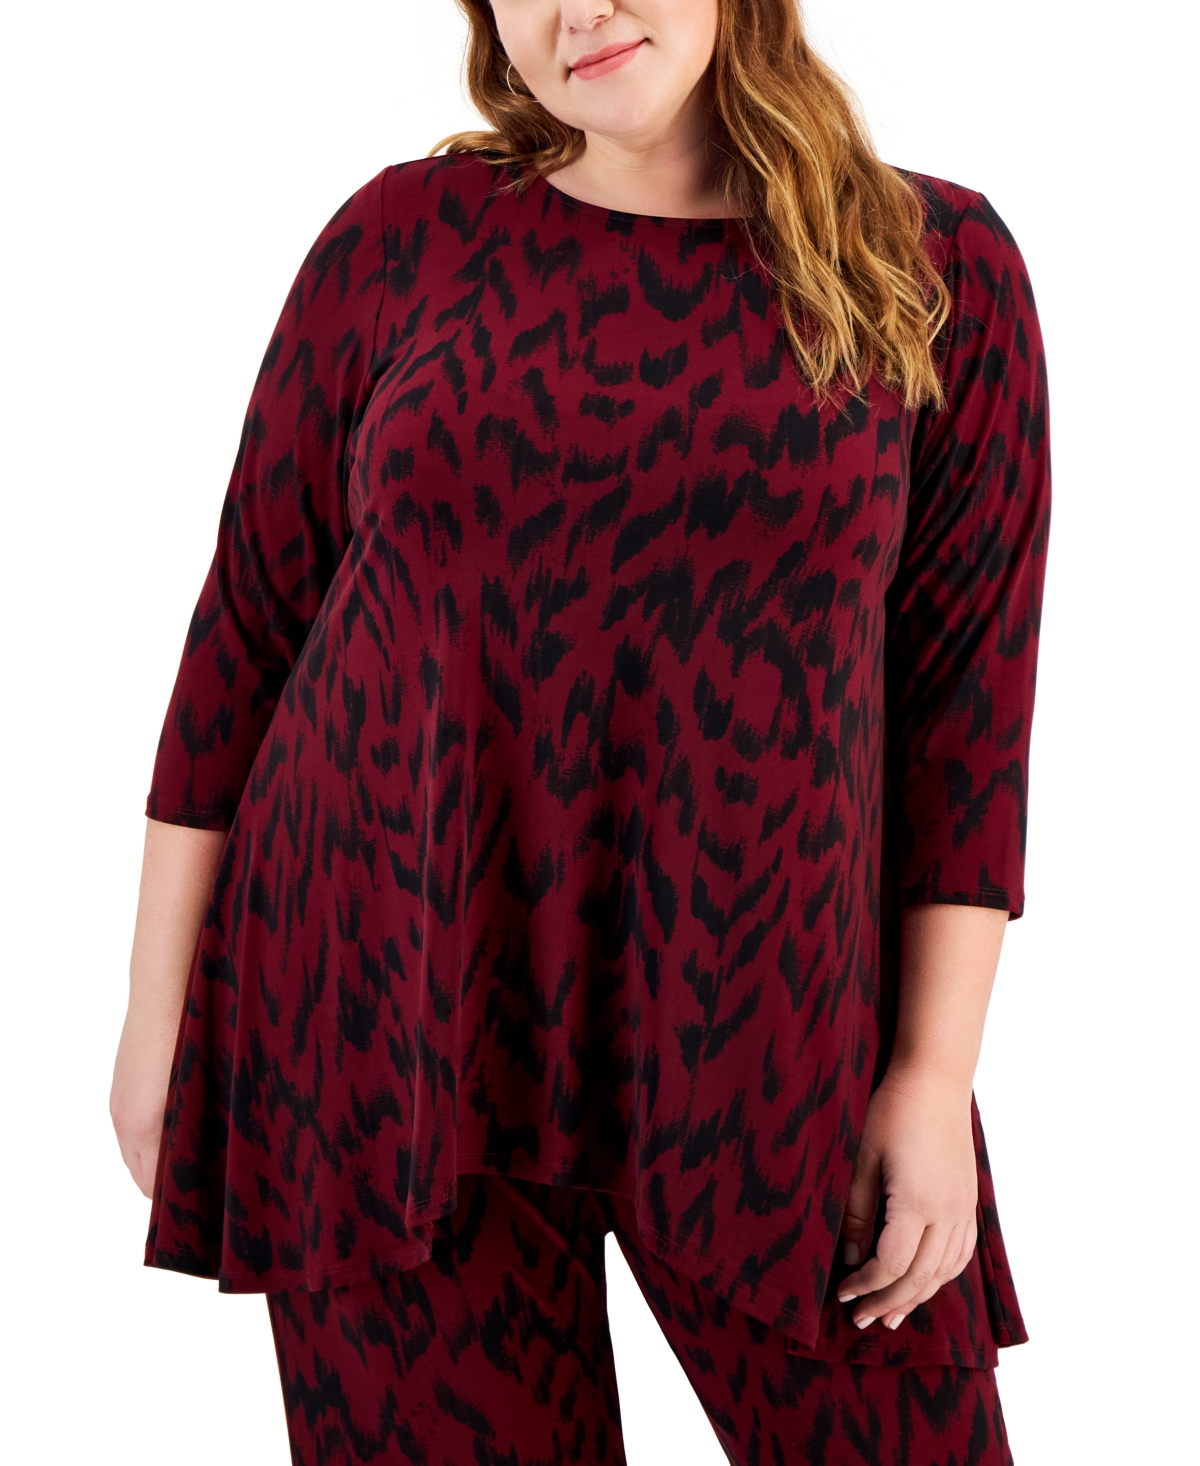 Jm Collection Plus Size Printed Swing Top, Created For Macy's In Dark Rust Combo